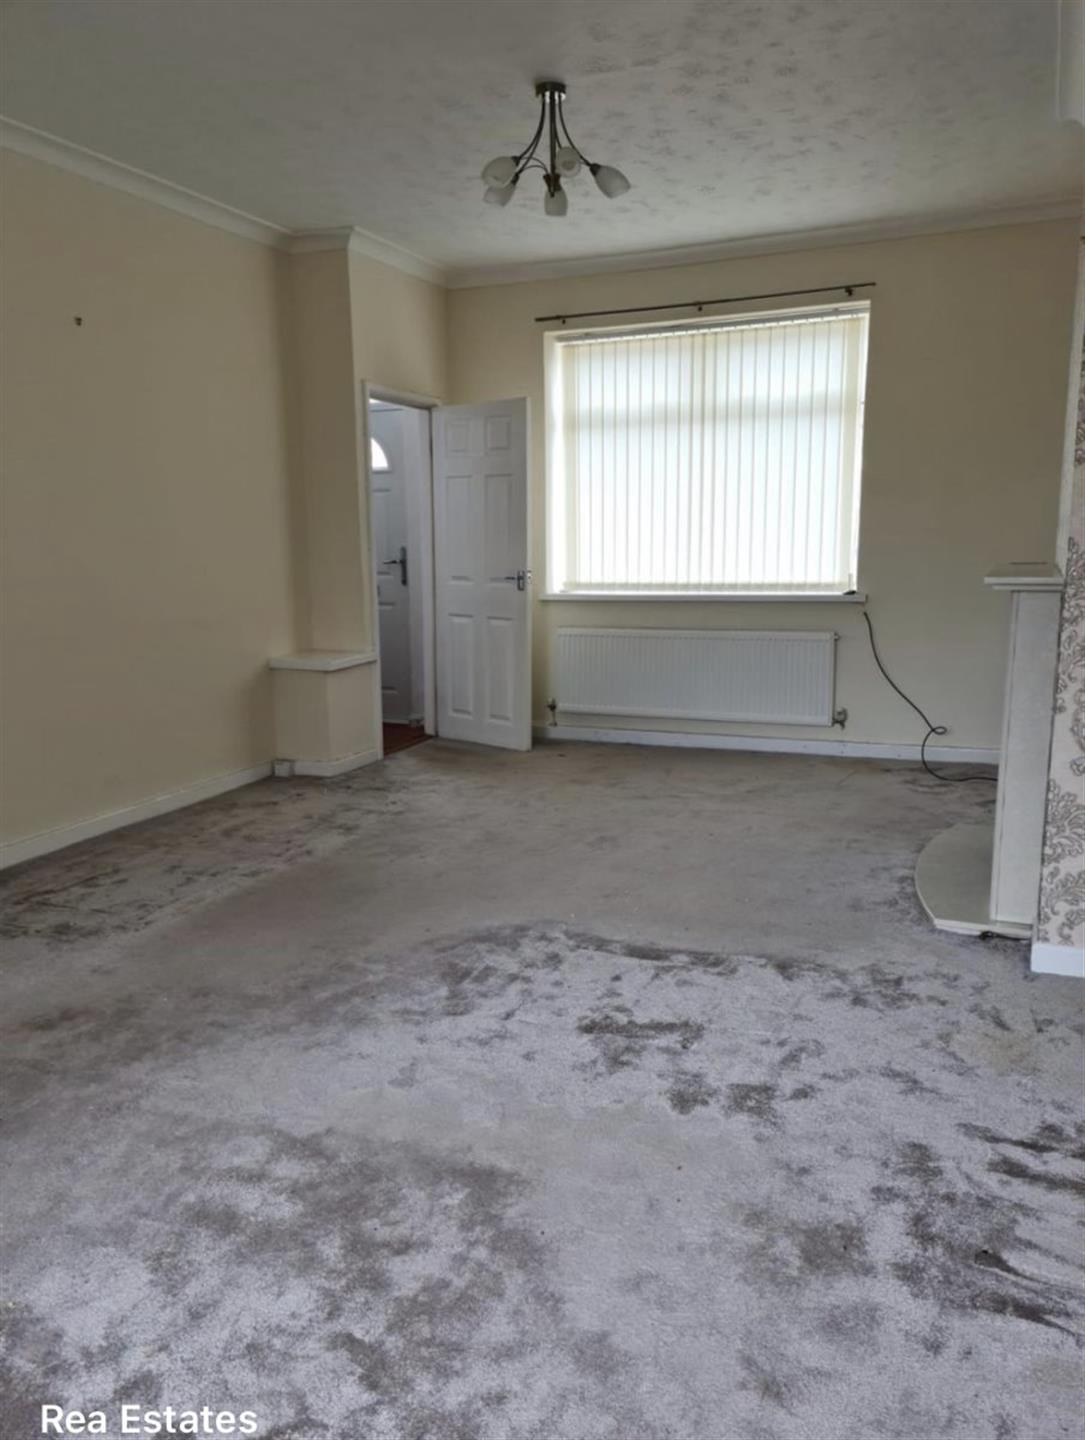 2 bedroom terraced house To Let in Saint Helens - photograph 3.